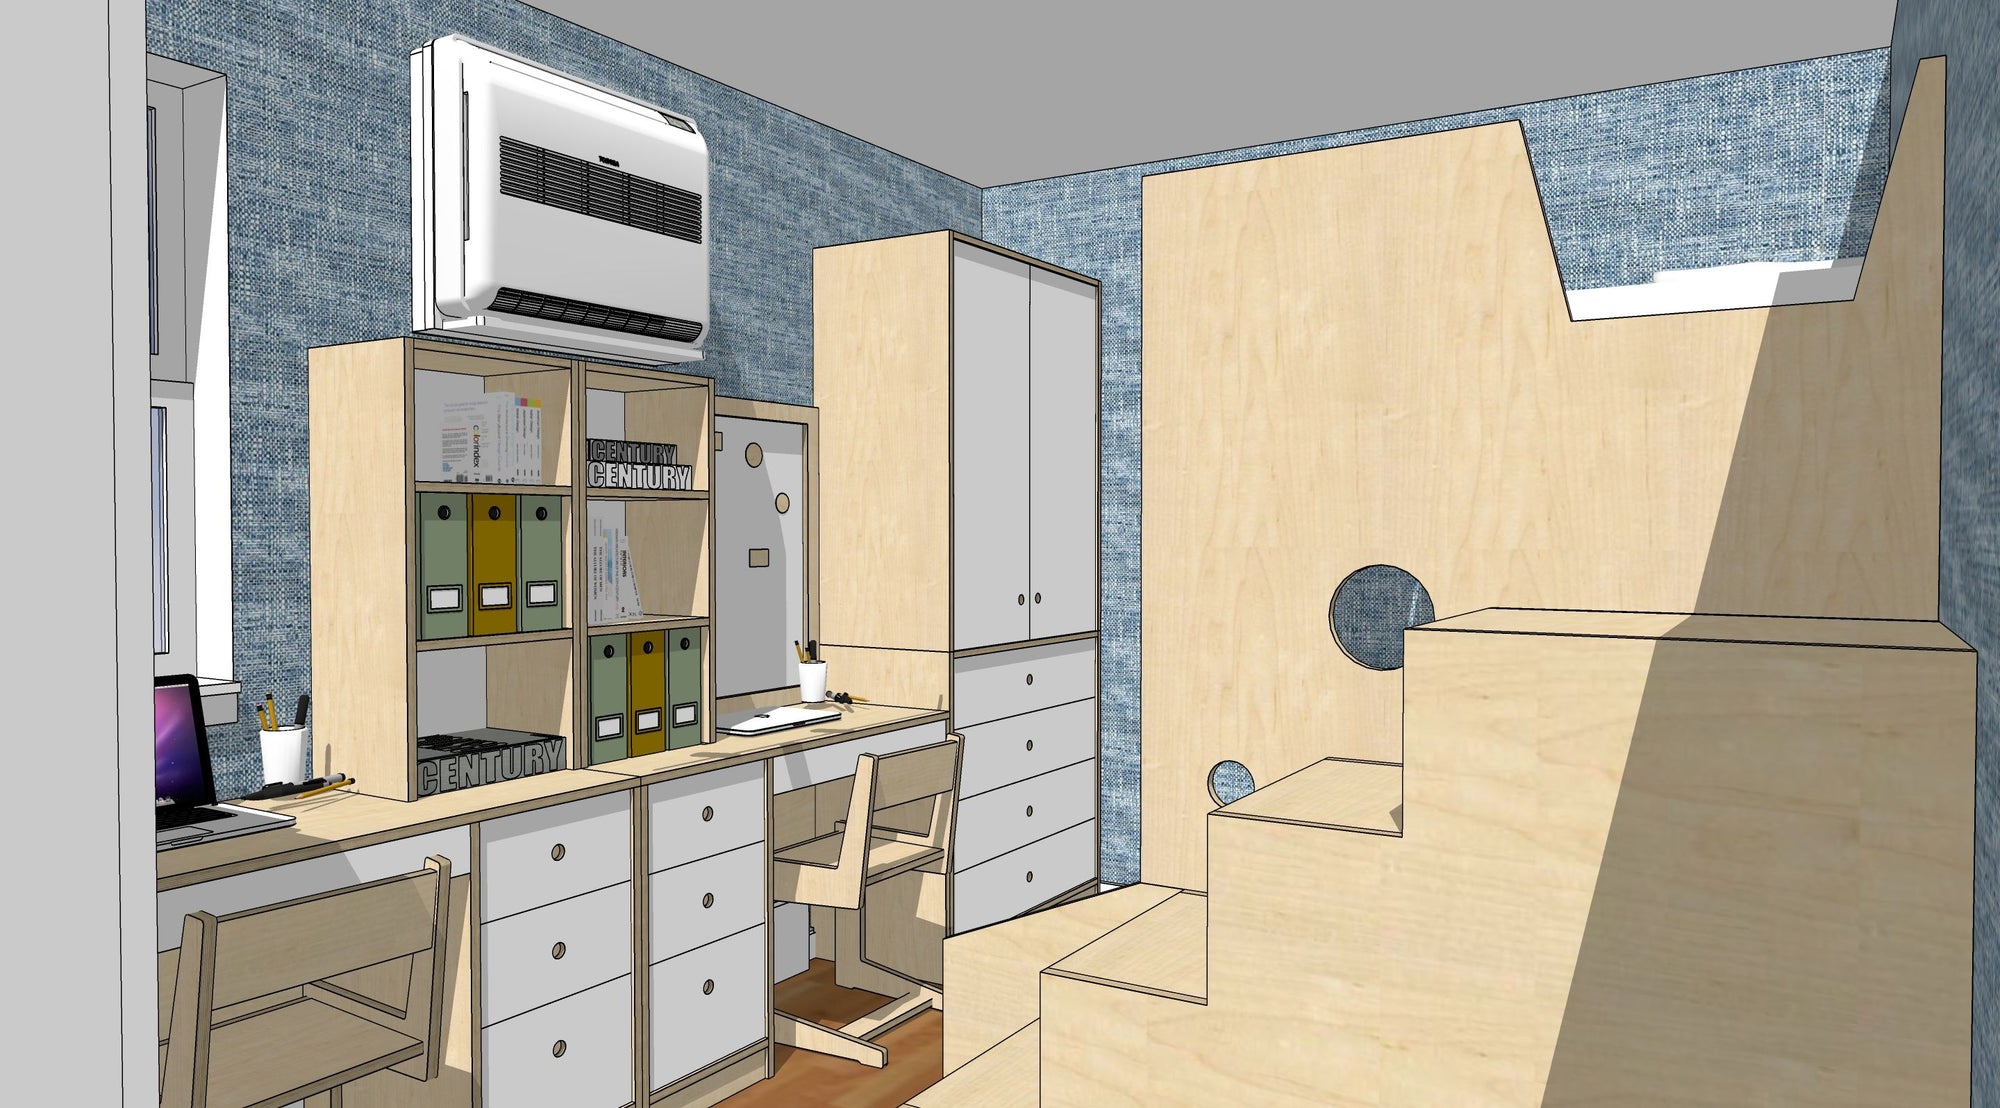 Modern kitchen with white cabinets, appliances, blue walls, no people, 3D rendered, clean design.